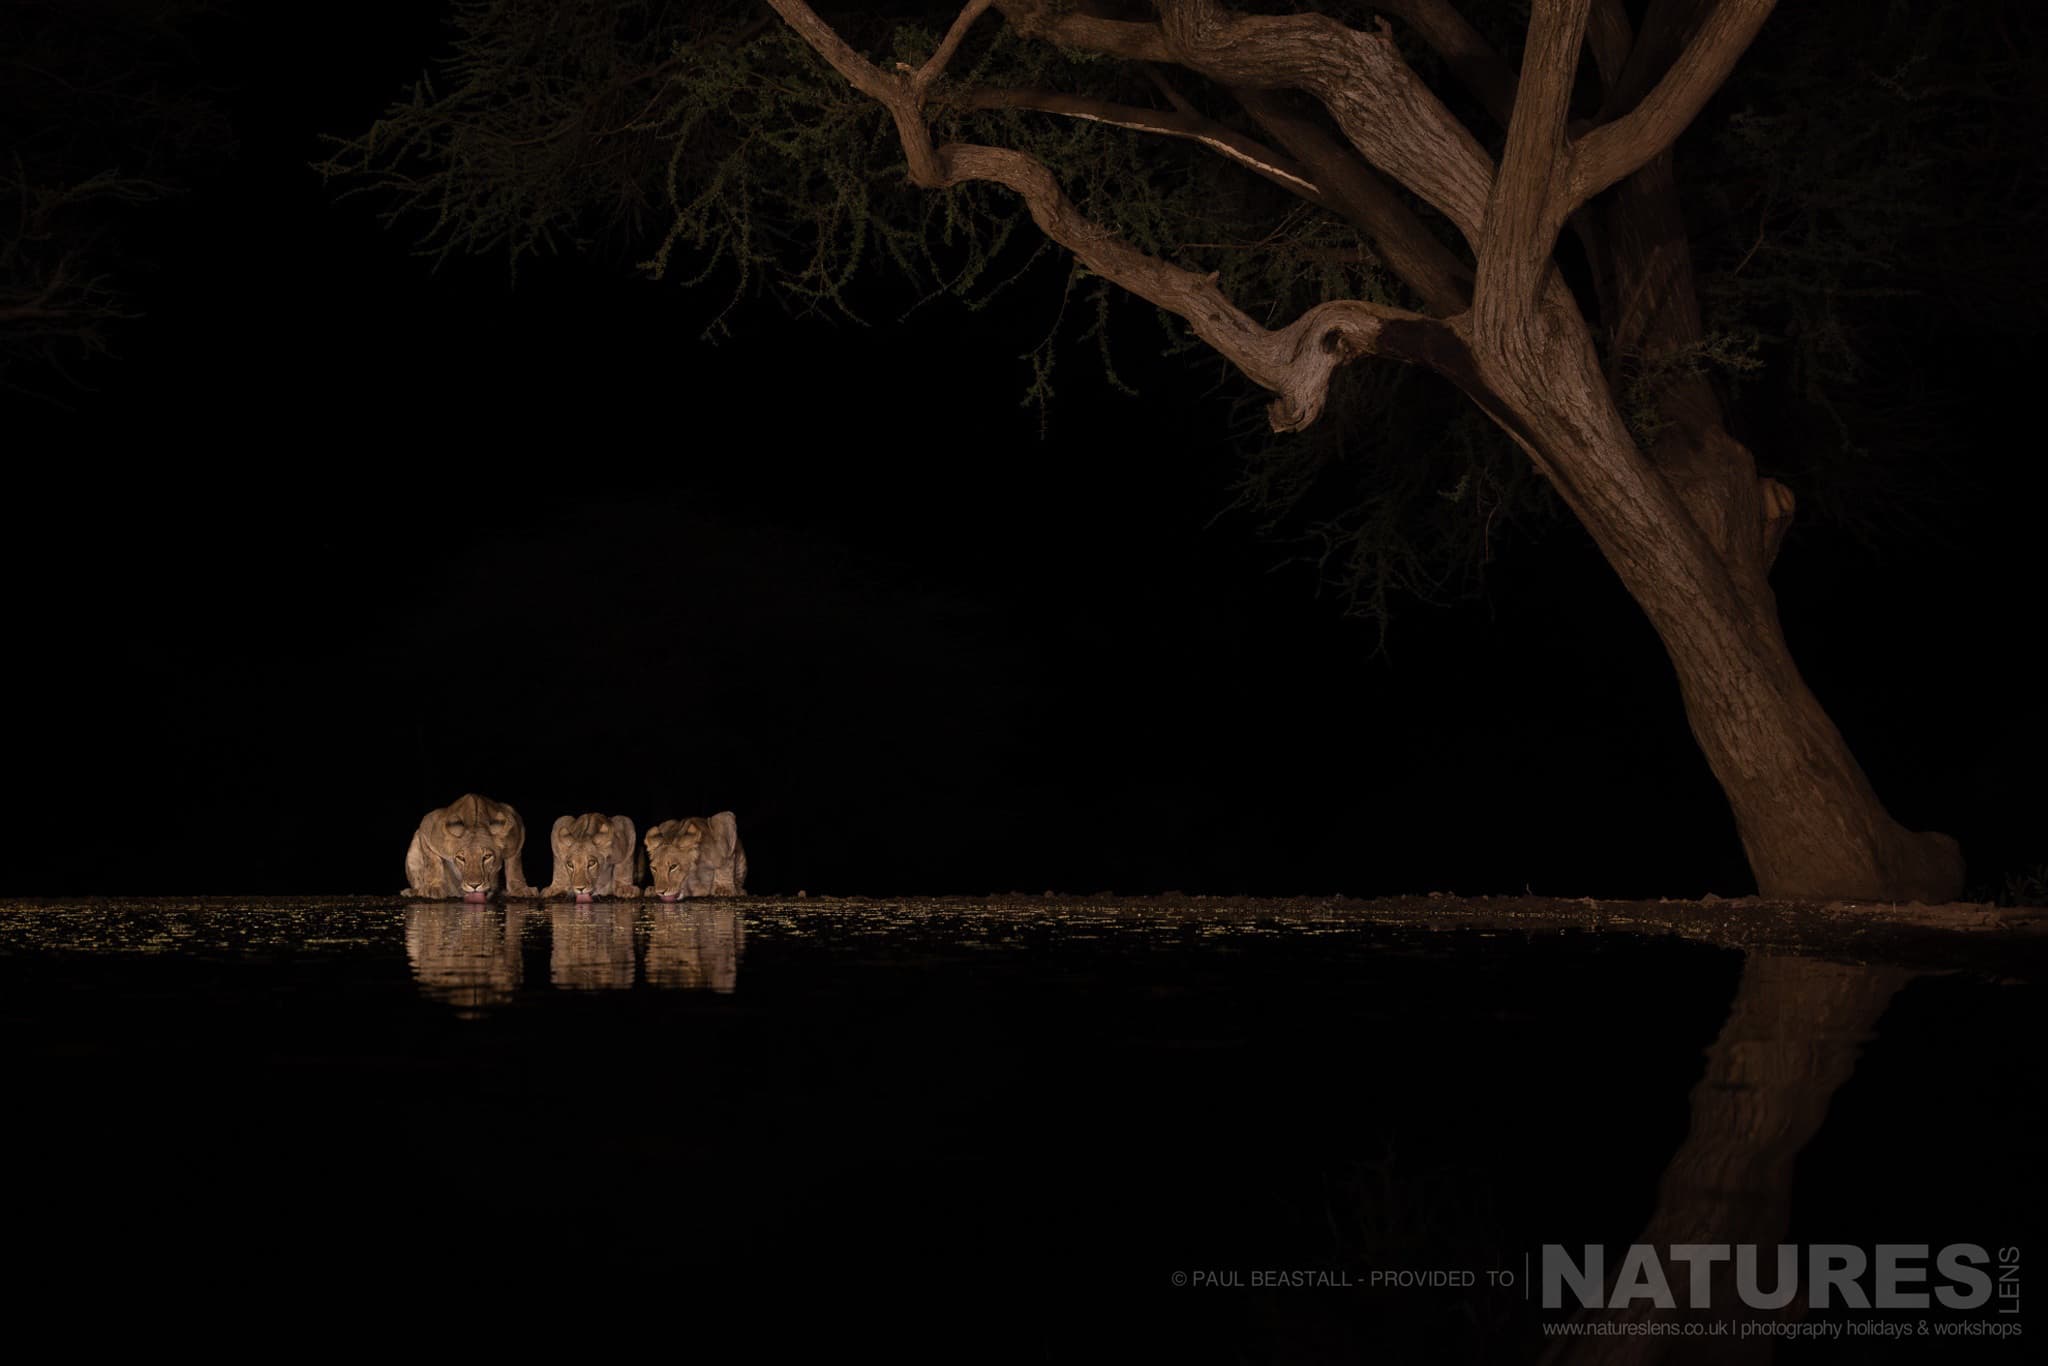 A Trio Of Lions Drinking From The Waterhole At Night Photographed By Paul Beastall During A Photography Holiday At Lentorre Lodge With Natureslens